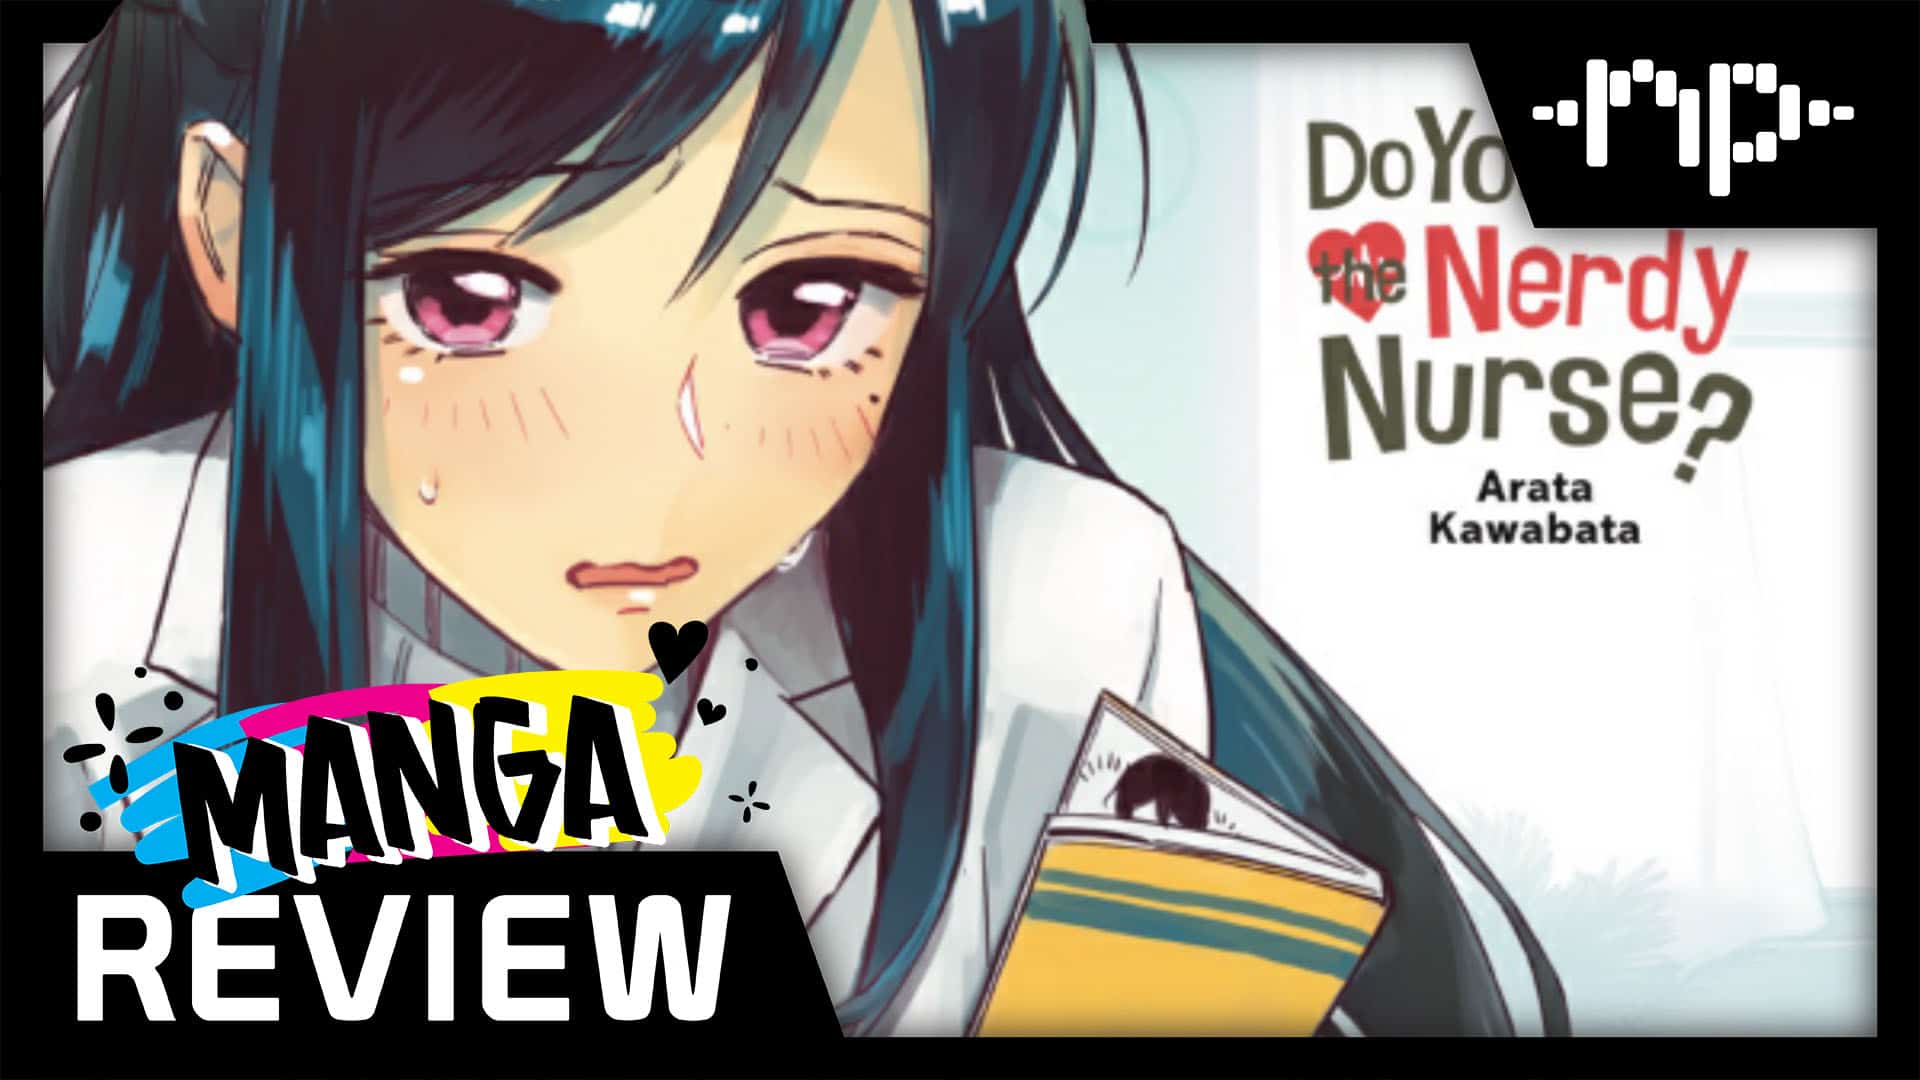 Do You Like the Nerdy Nurse Review – Don’t Judge a Book By its Cover